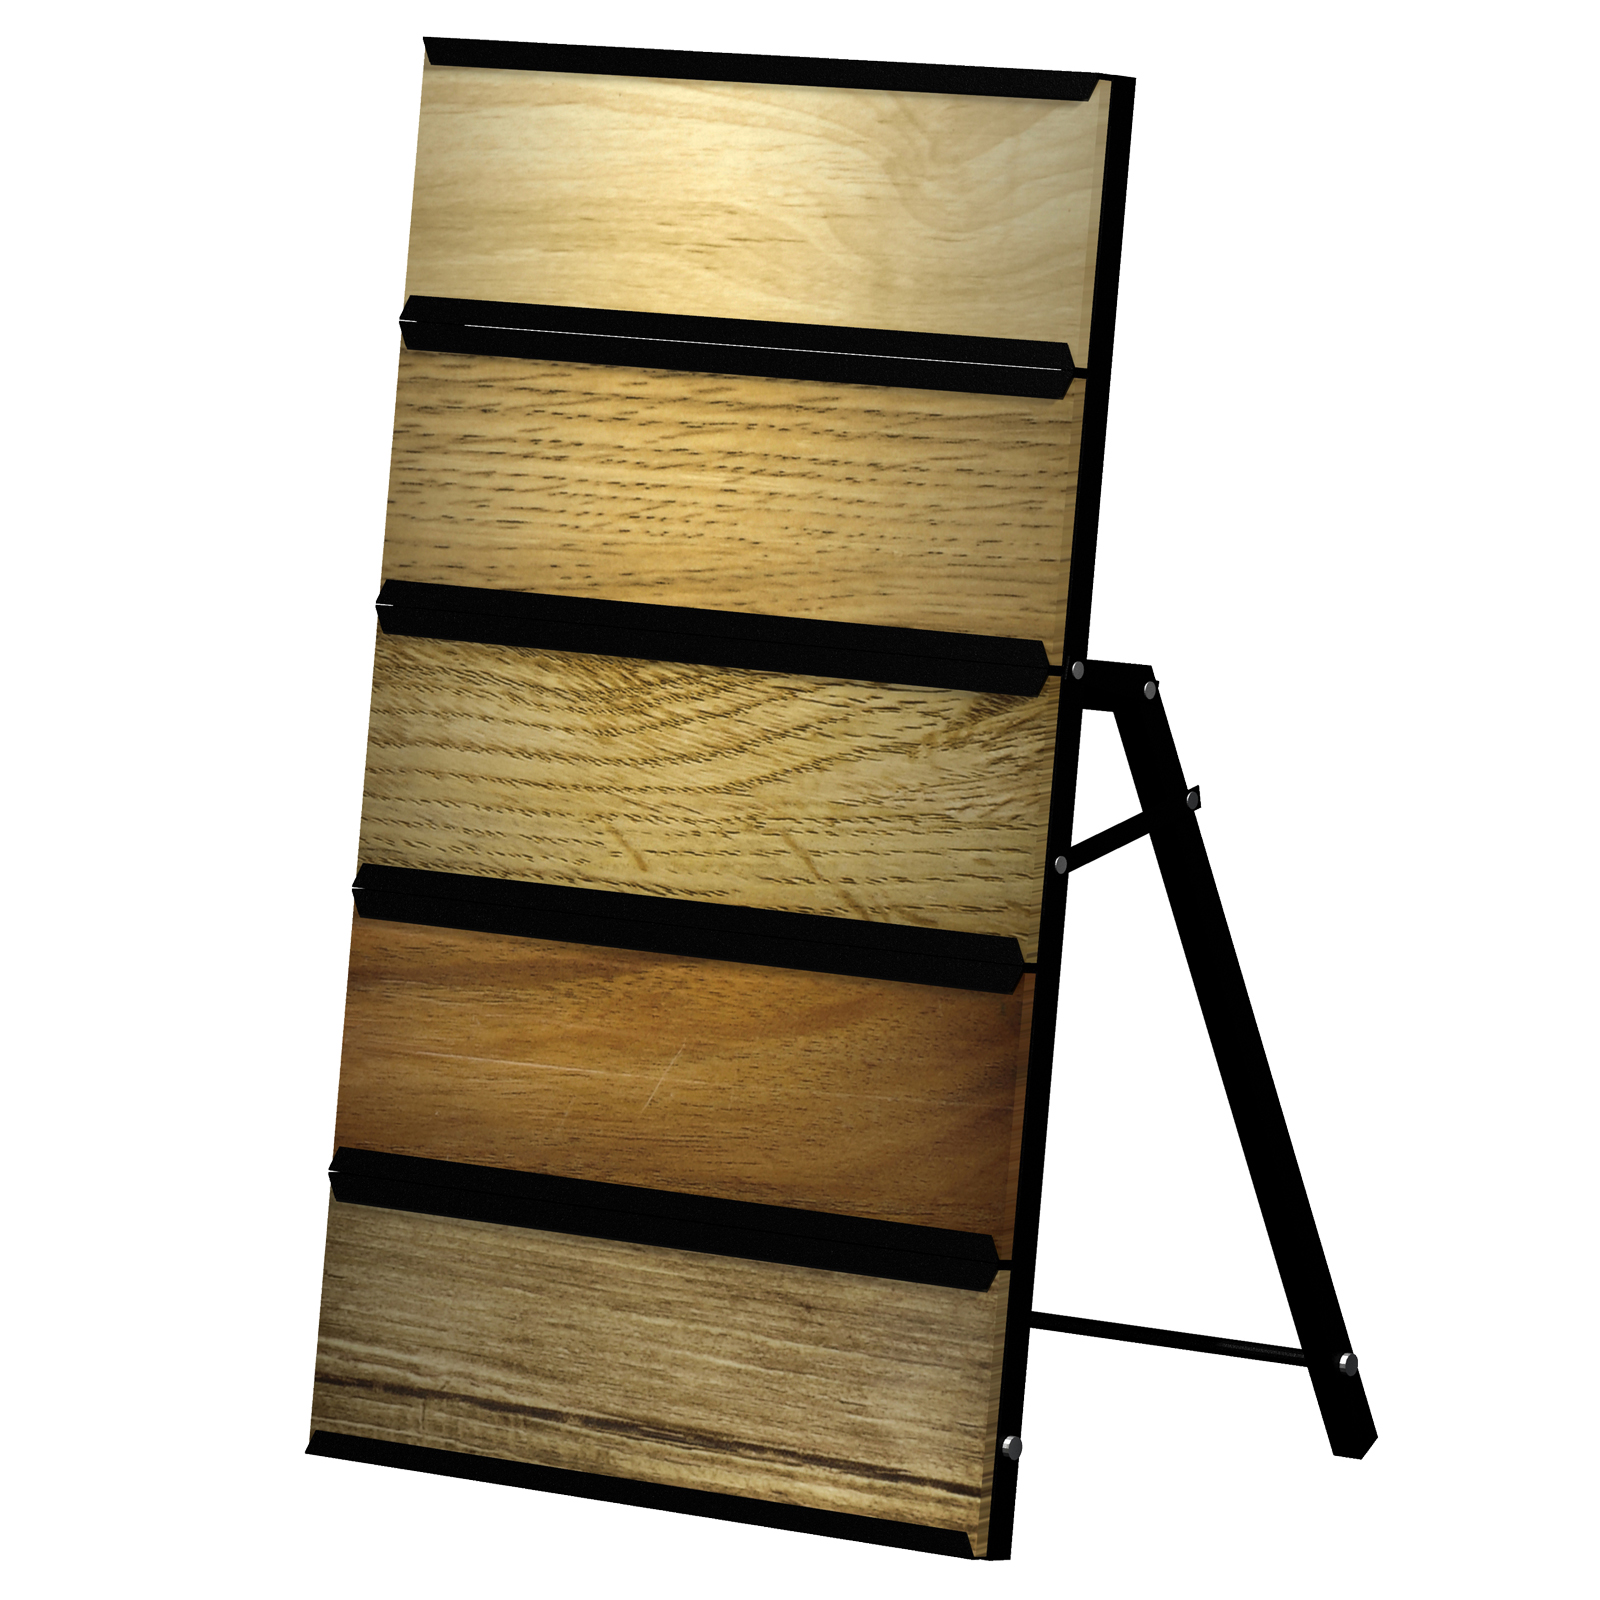 CD61 Easel A-Frame Portable Hardwood Laminate Bamboo Reclaimed Wood Plank Showroom Channel System Display